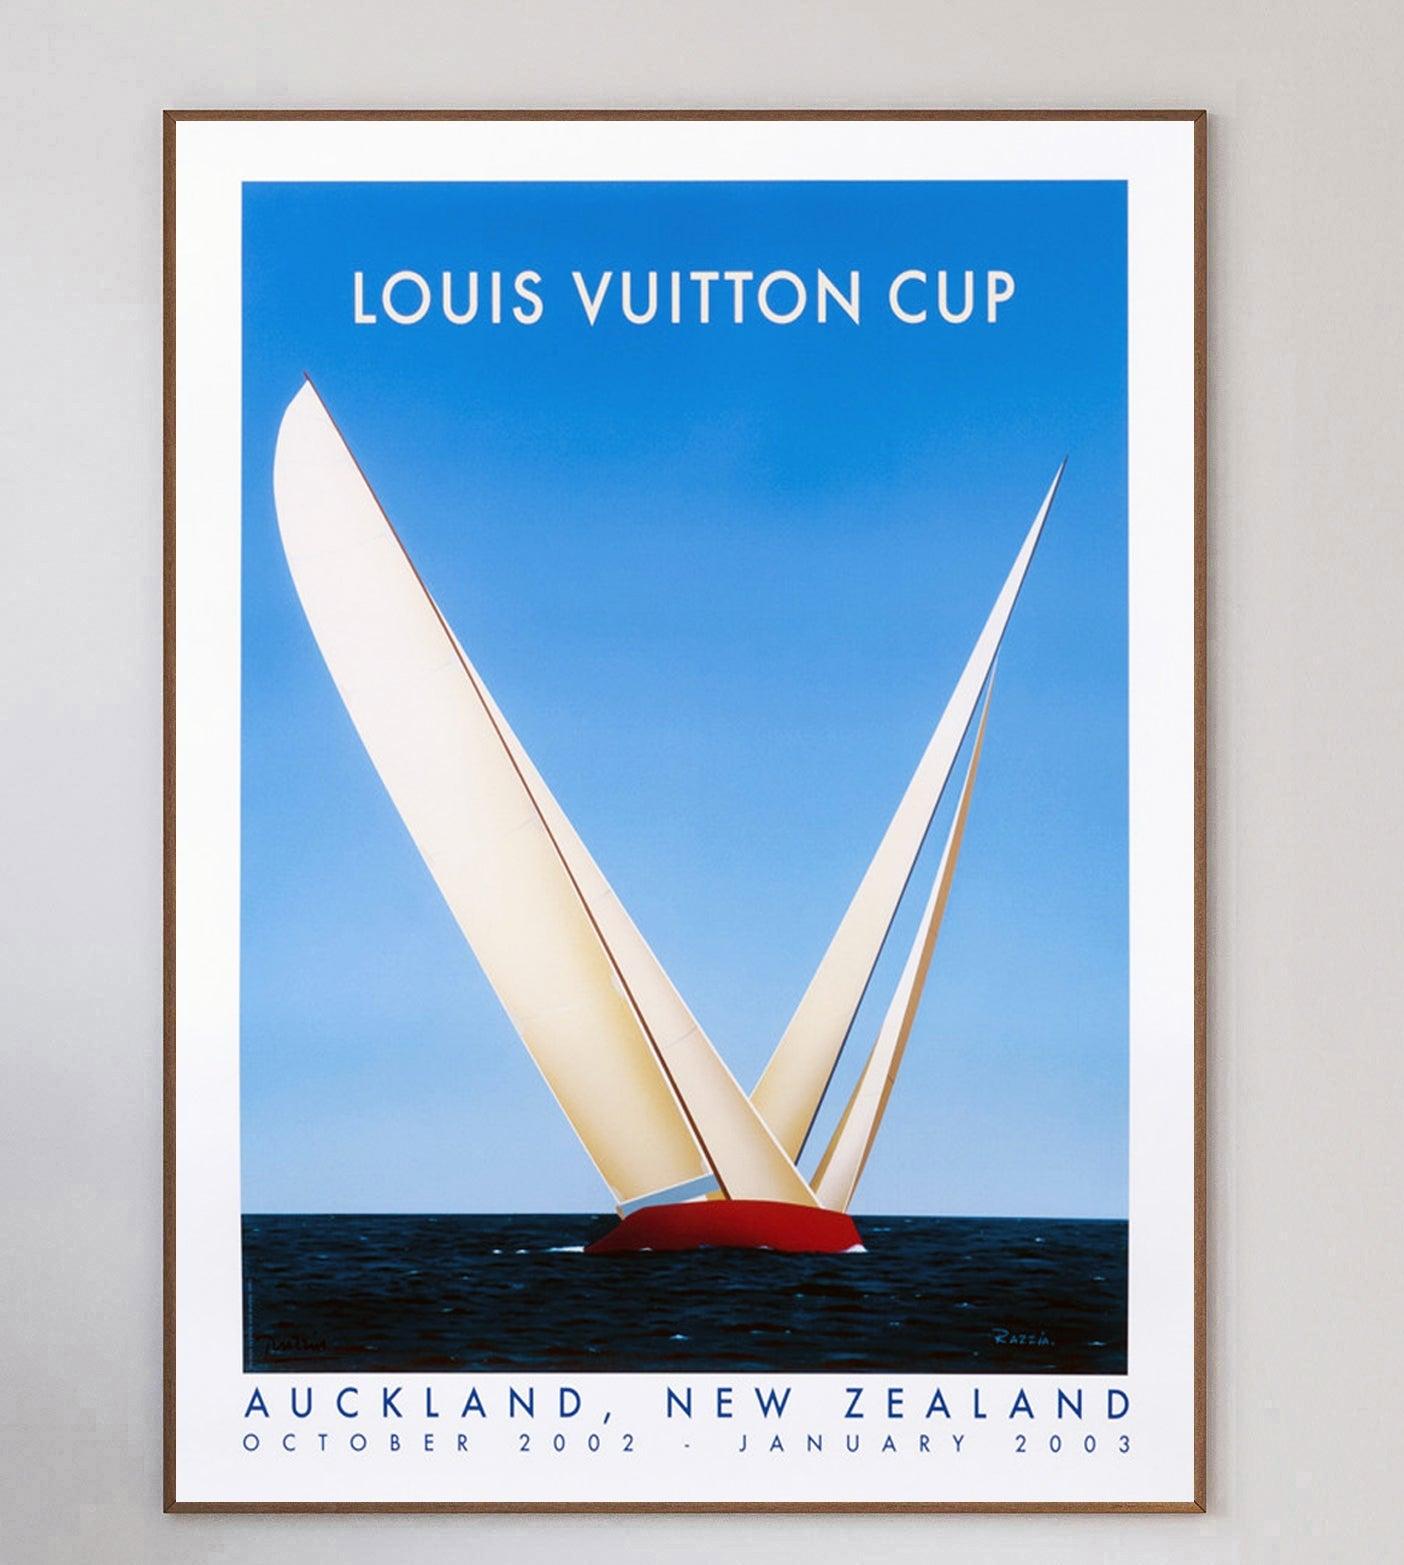 Depicting a gorgeous art deco scene of a sail boat on a blue horizon, this piece was created in 2002 to promote the Louis Vuitton Cup event that year. The Louis Vuitton Cup was a competition where teams would race to determine who would be the